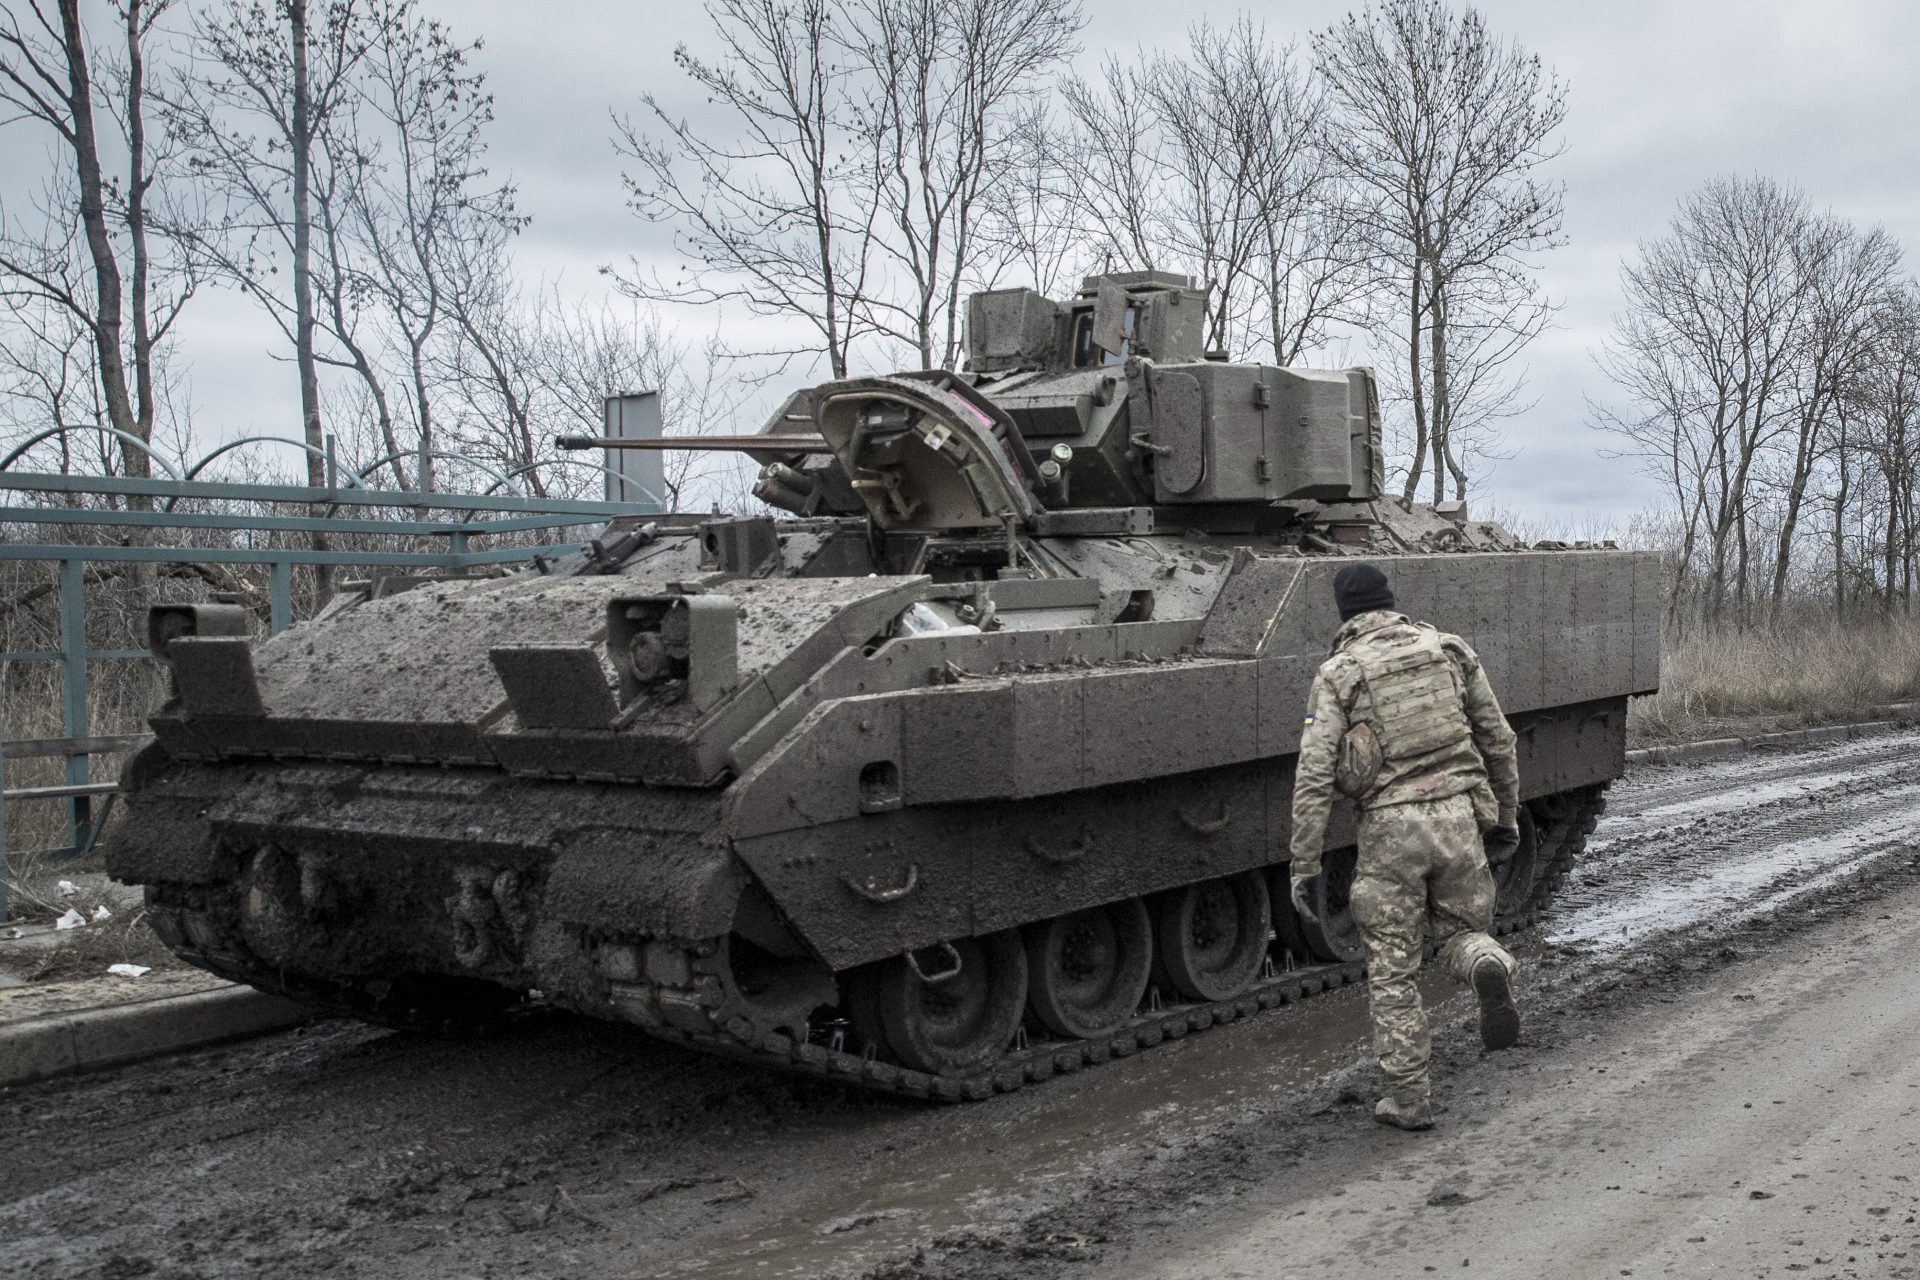 Stunning footage reveals an M2 Bradley going head-to-head with a Russian vehicle